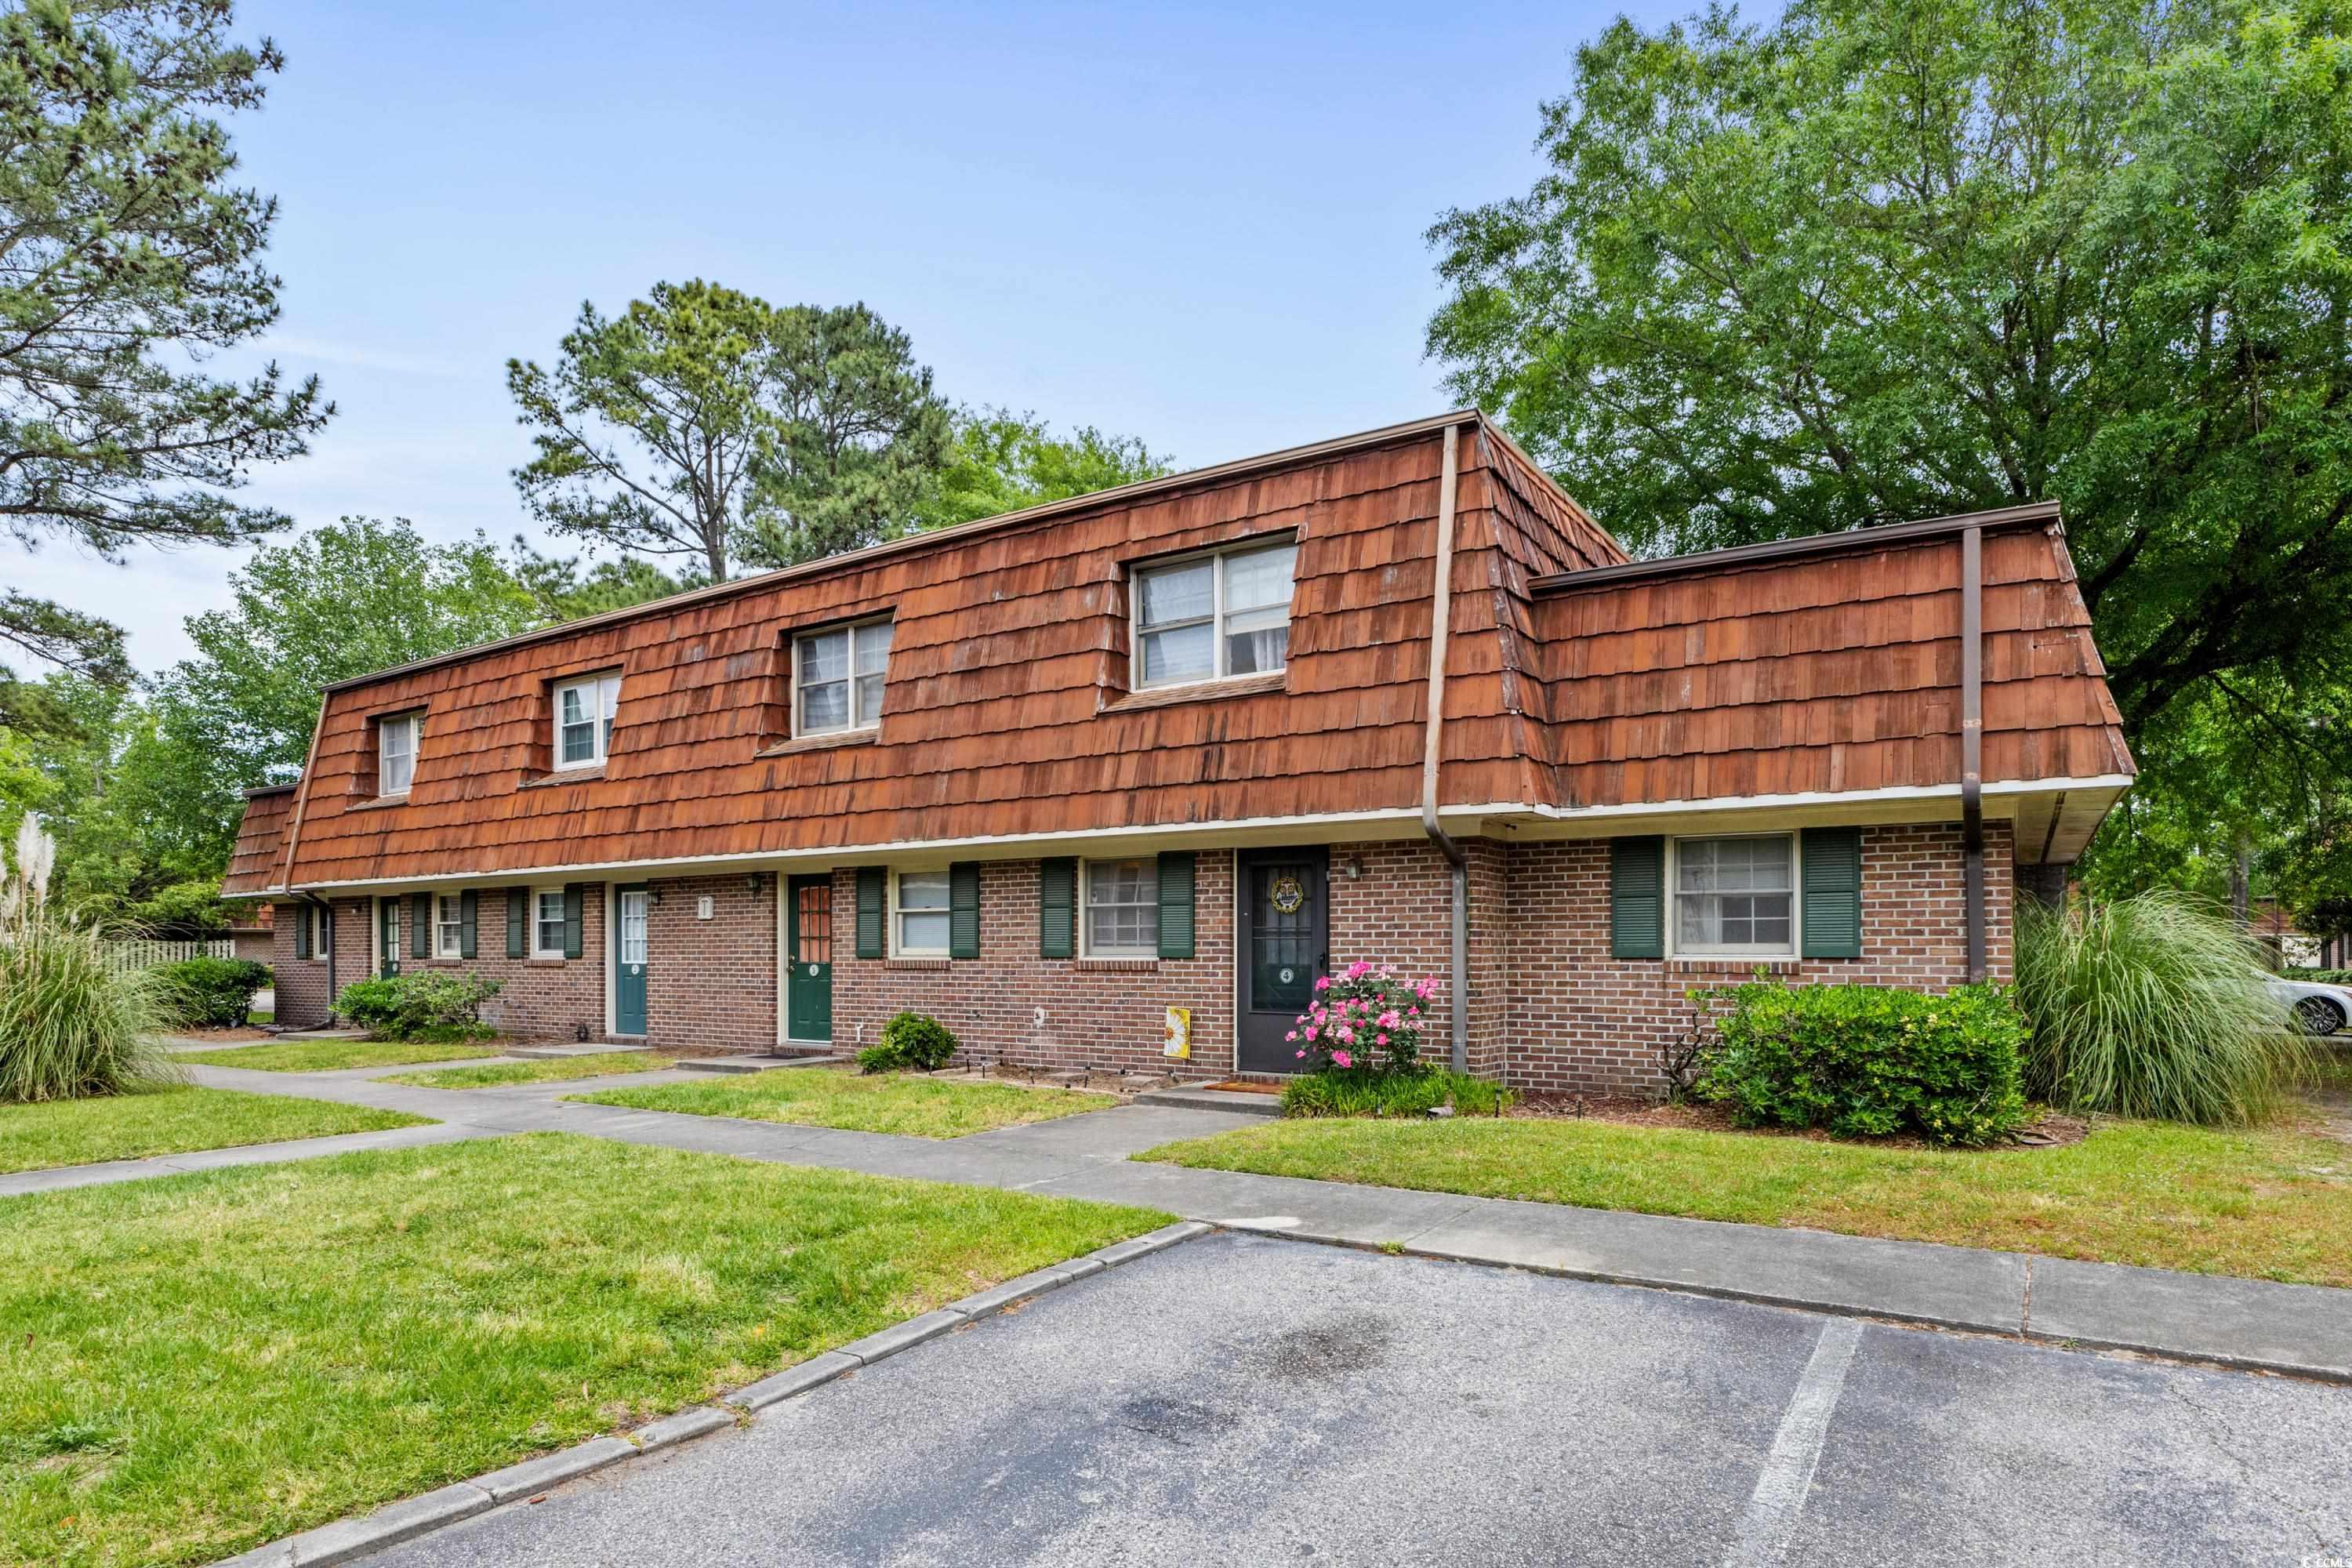 here is an awesome opportunity to own an end unit minutes from the university or the beach! this townhome offers tons of space including a huge outdoor patio that's fenced in! this end unit is literally in the backyard of coastal carolina university. this would be great as an investment for students or first time home buyers! make sure you make an appt today to see this unit!